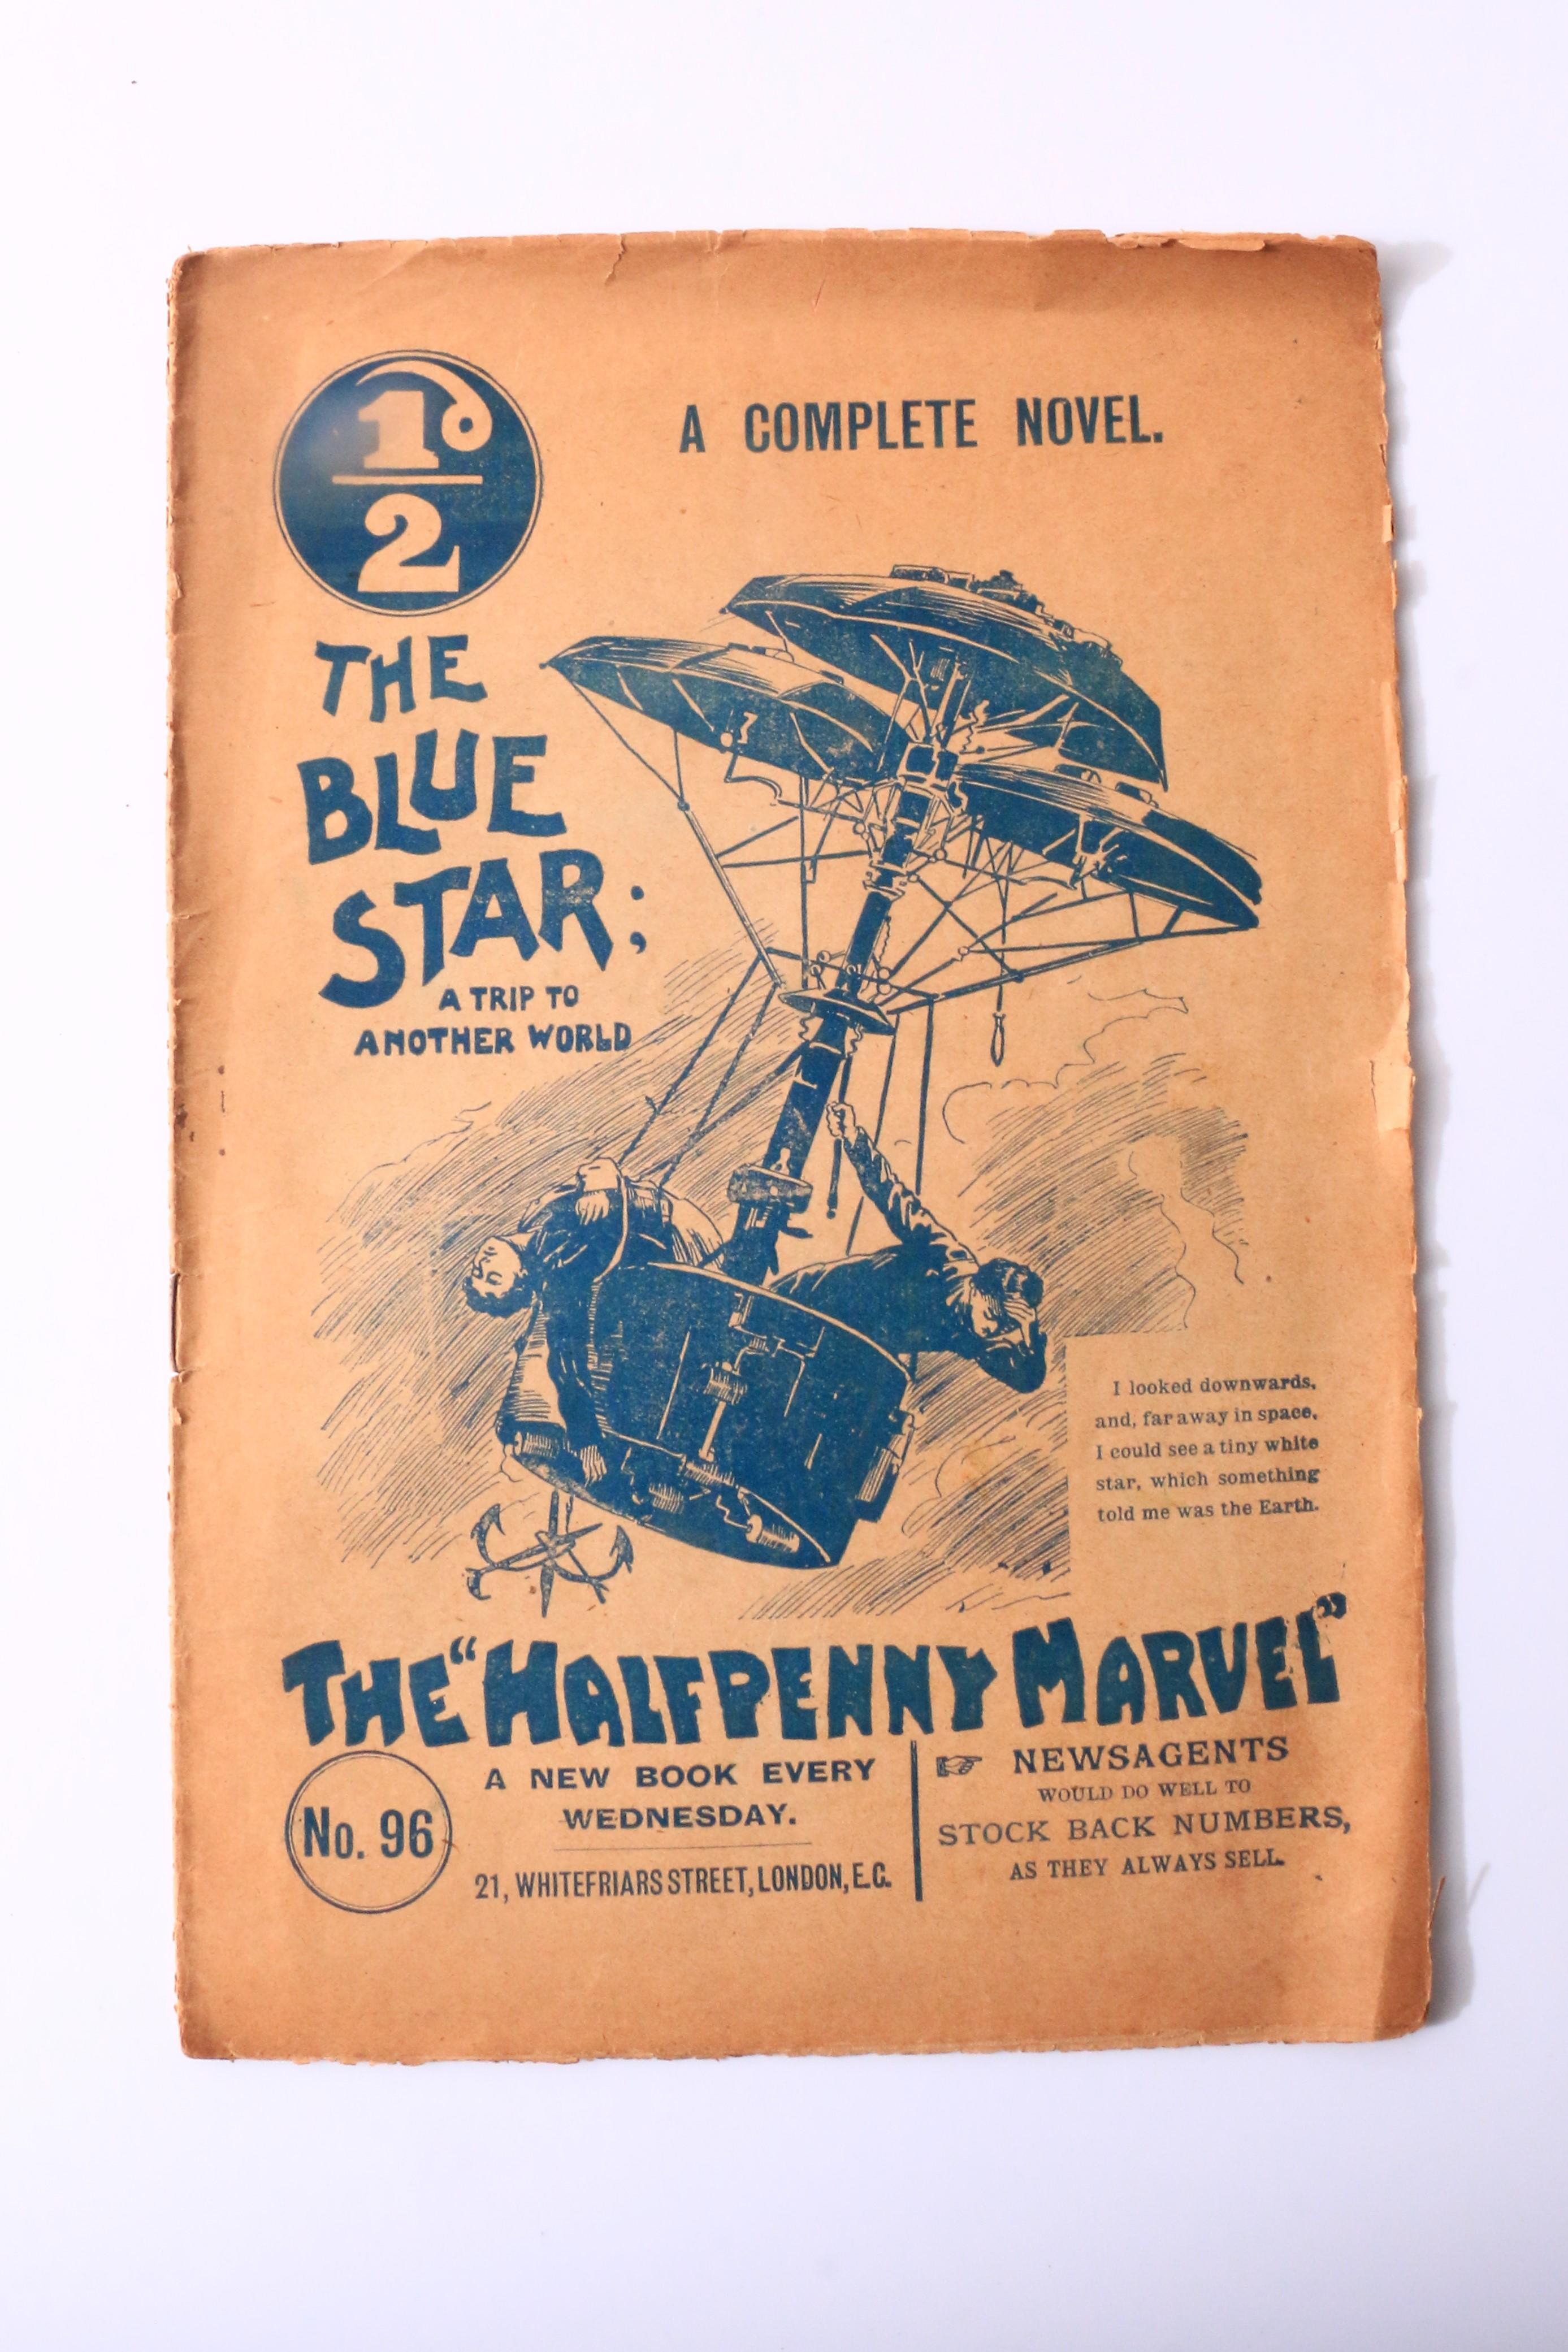 Various [inc.] John W. Hill - The Blue Star; a Trip to Another World [in] The Halfpenny Marvel - Amalgamated Press, n.d. [1894/5], First Edition.